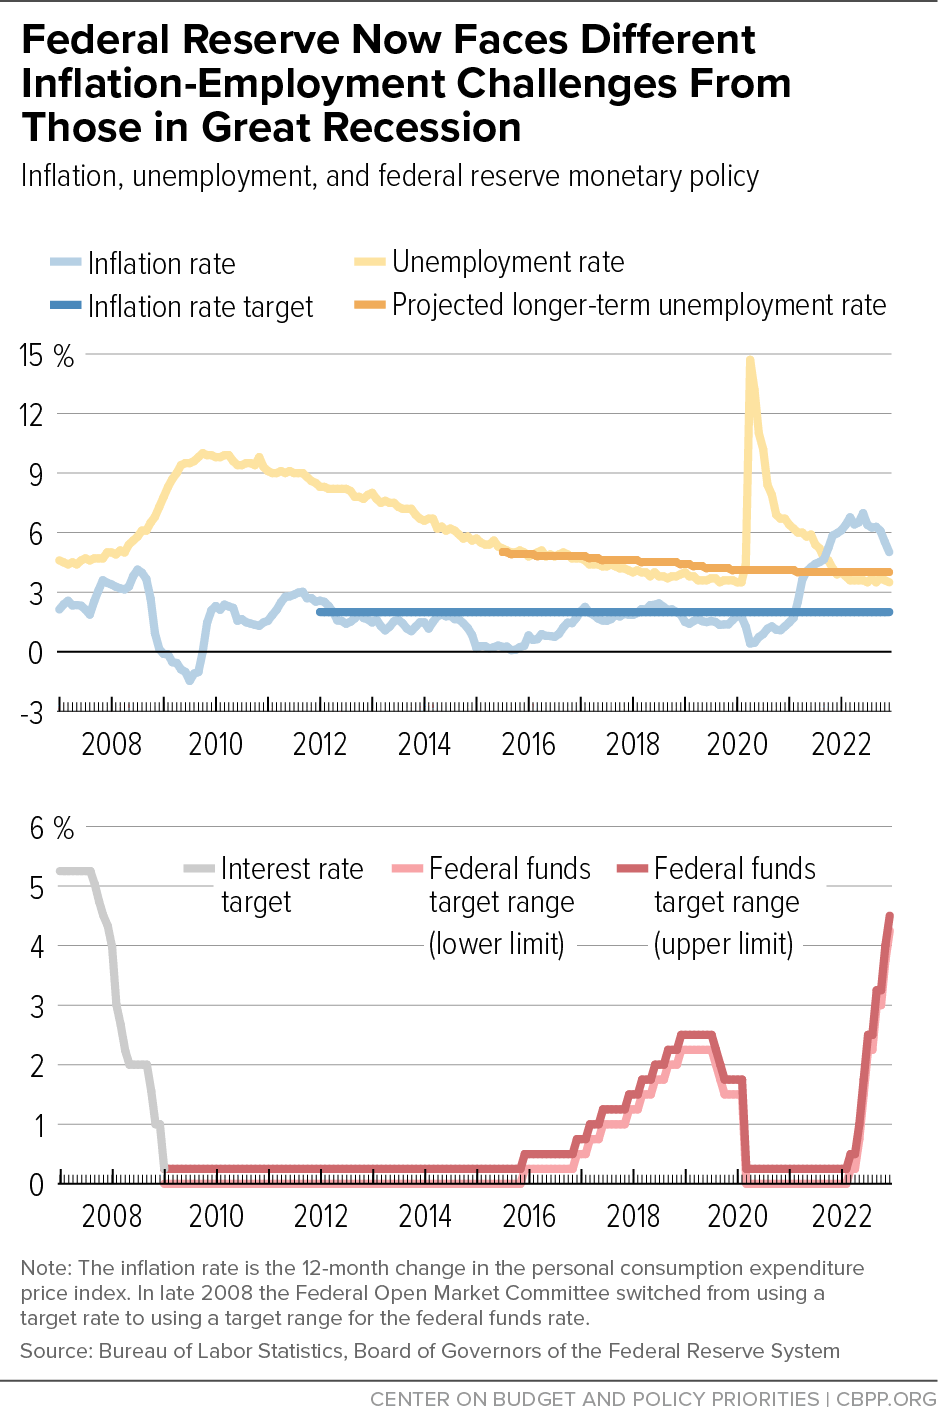 Federal Reserve Now Faces Different Inflation-Employment Challenges From Those in Great Recession